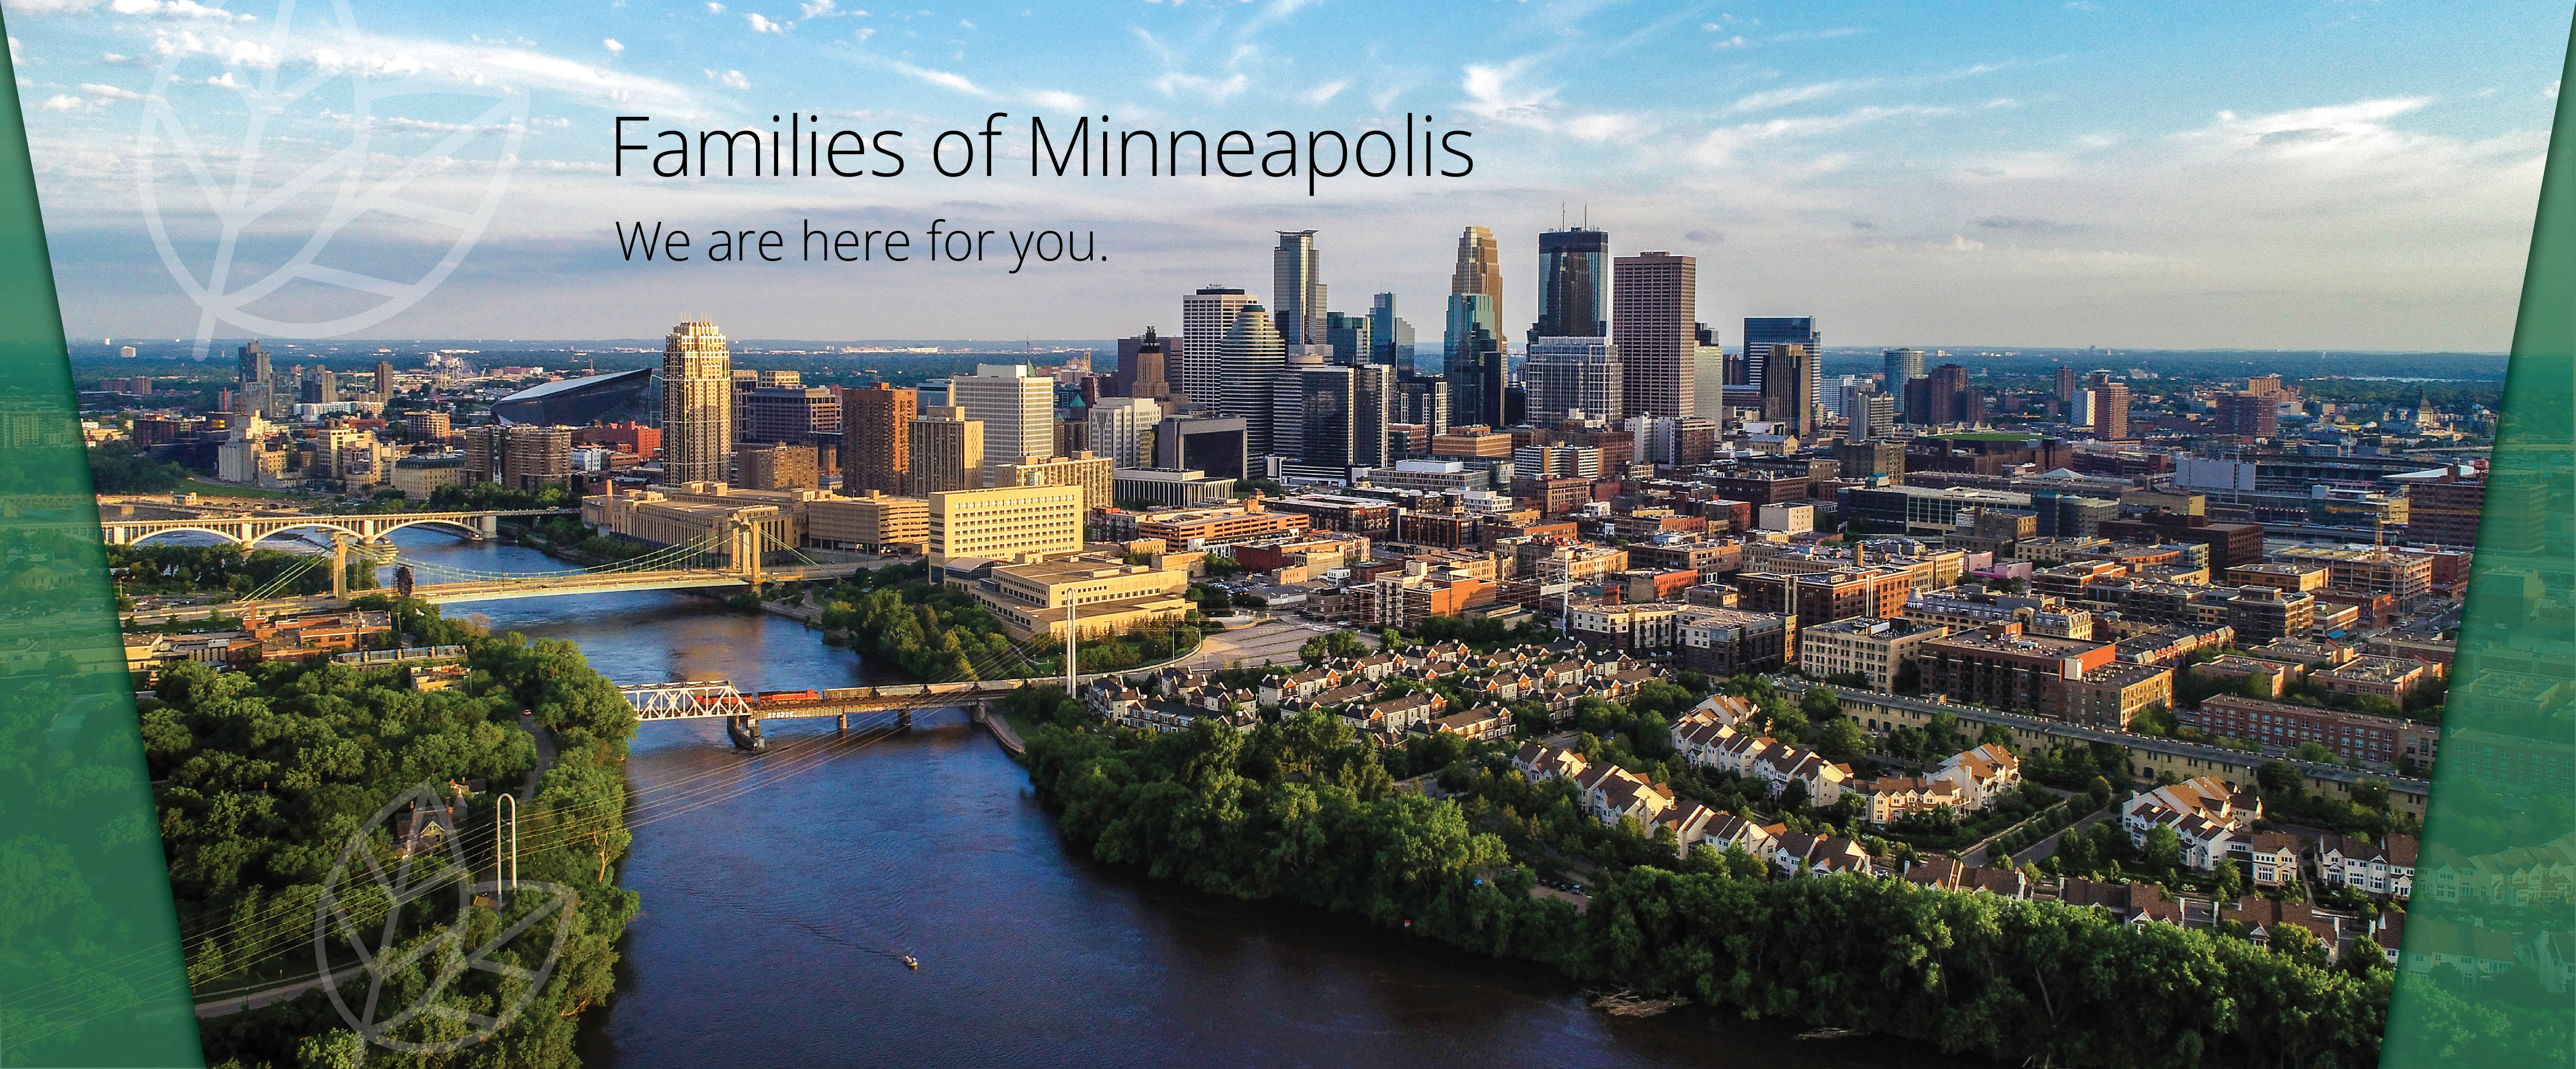 Families of Minneapolis, we are here for you. 
Bradshaw Funeral and Cremation Services
3131 Minnehaha Ave
Minneapolis, MN 55406